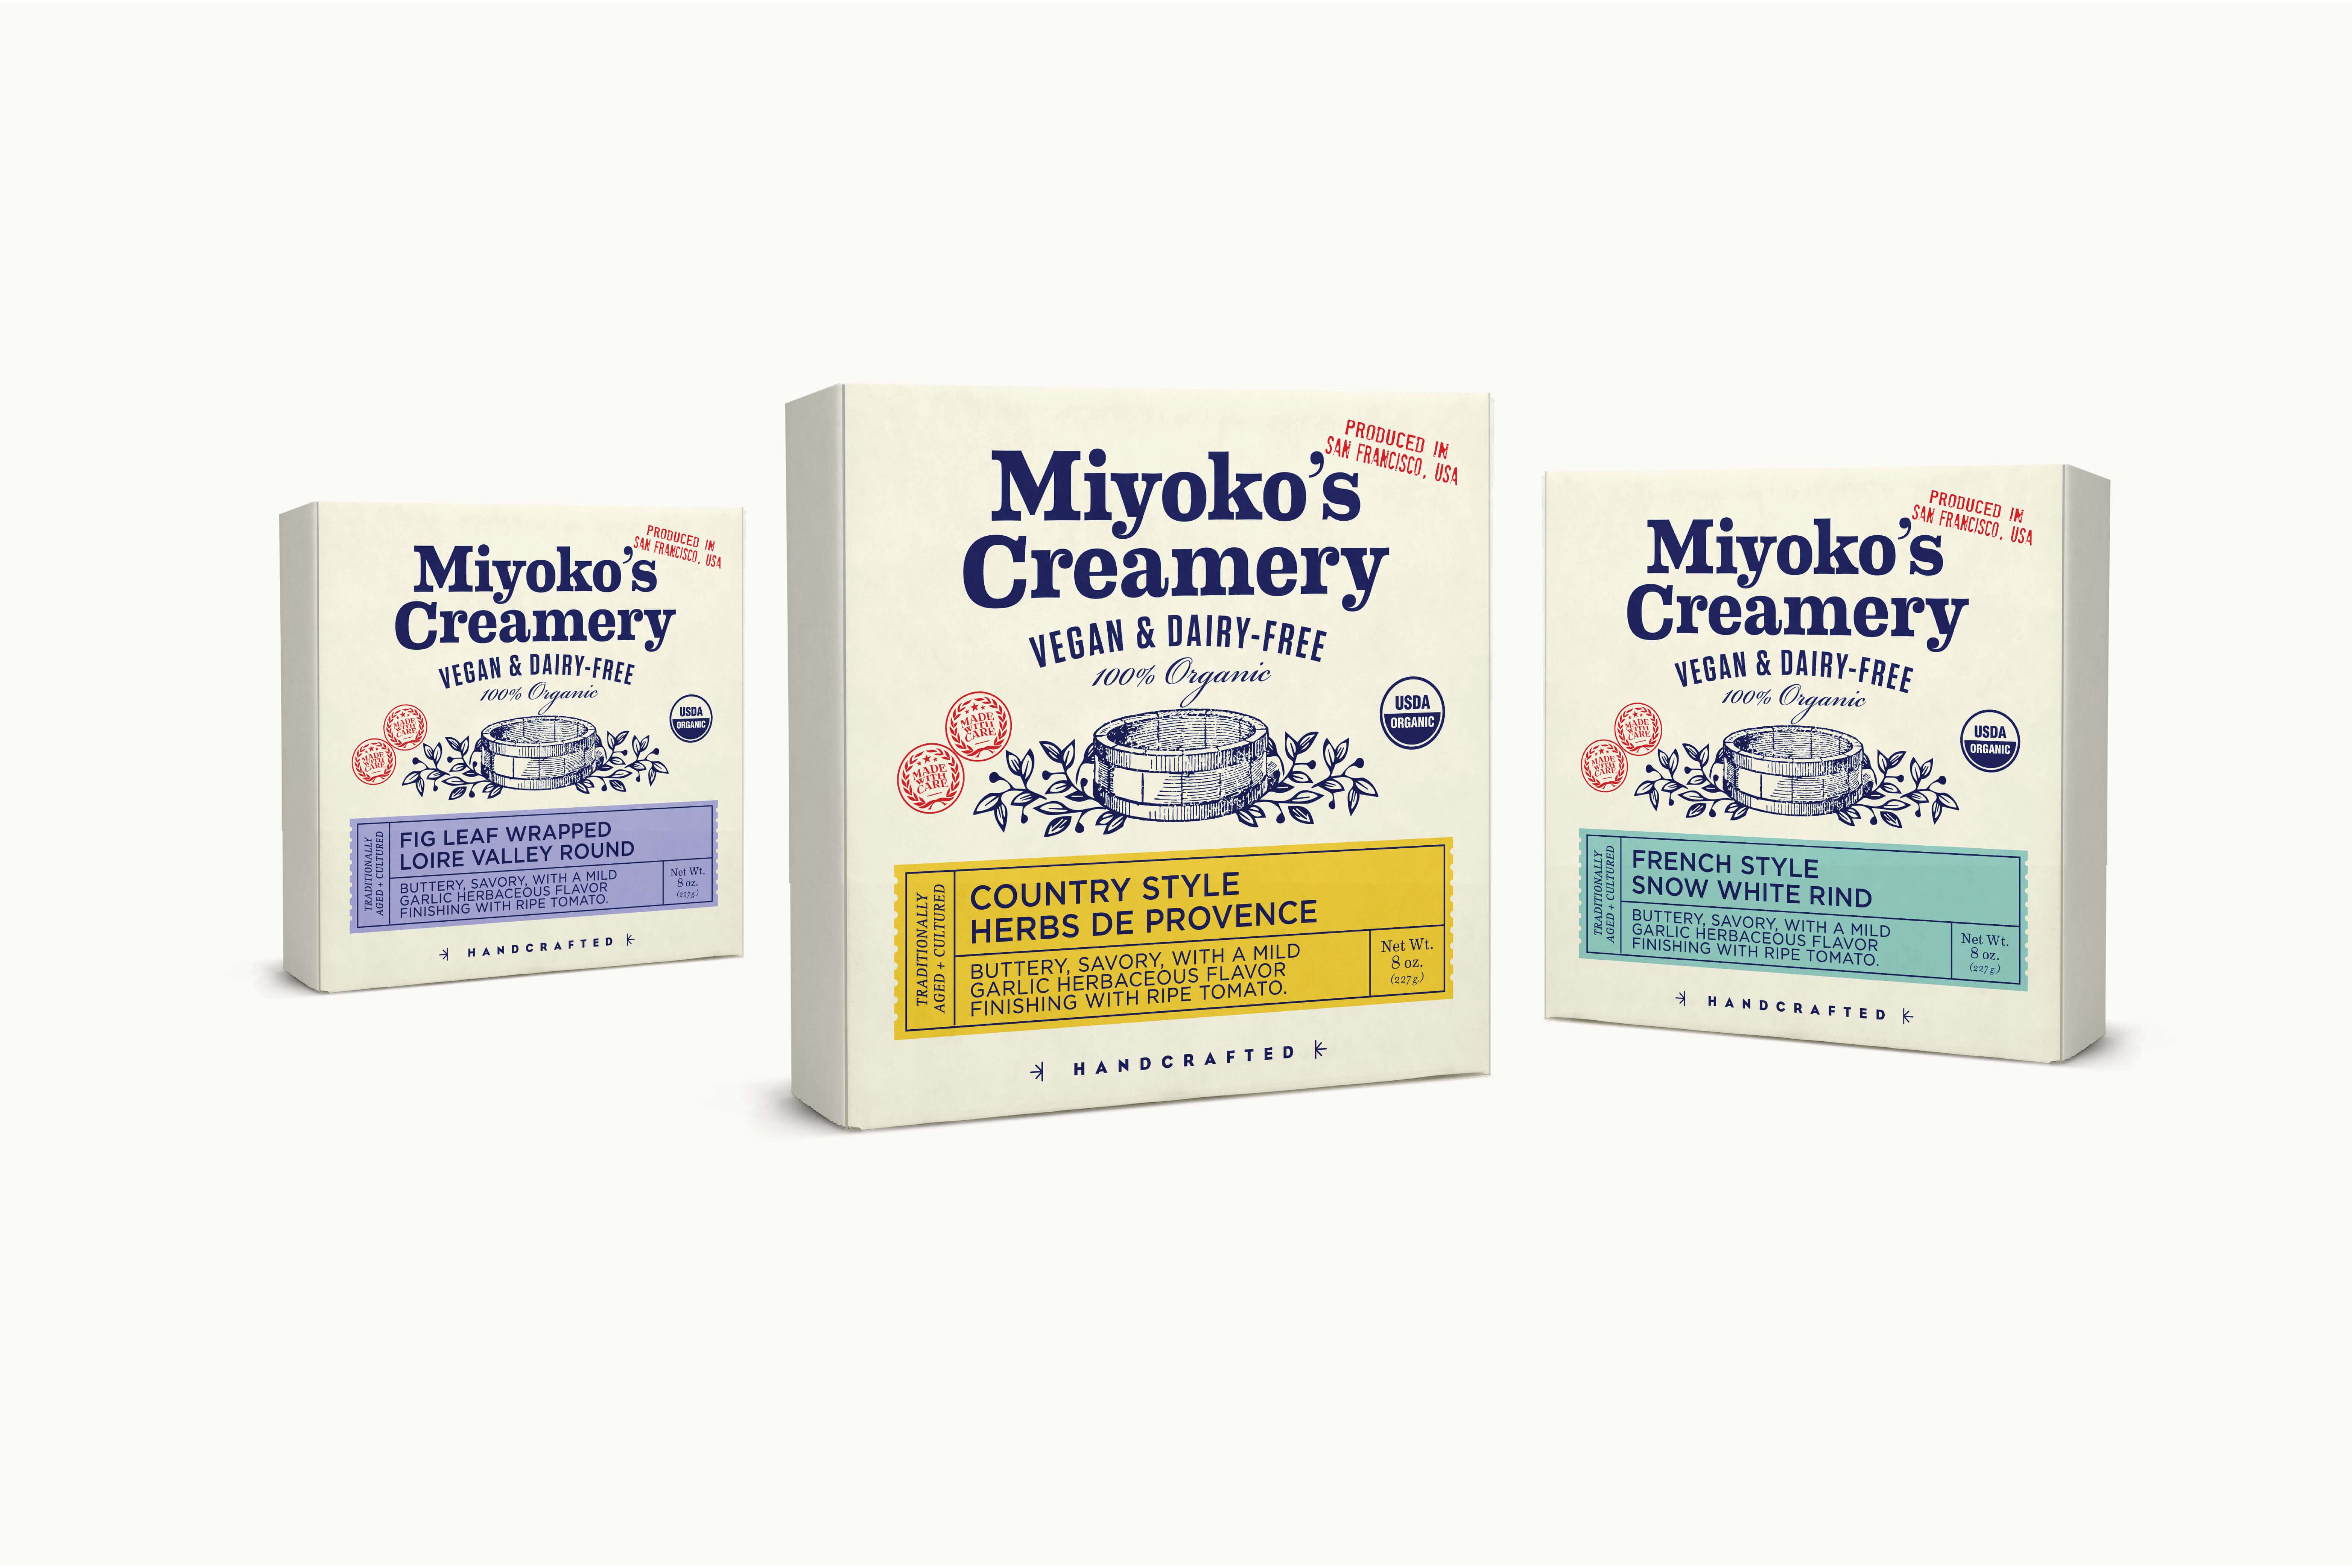 Runner up packaging design concept featuring an engraved vintage cheese press. 